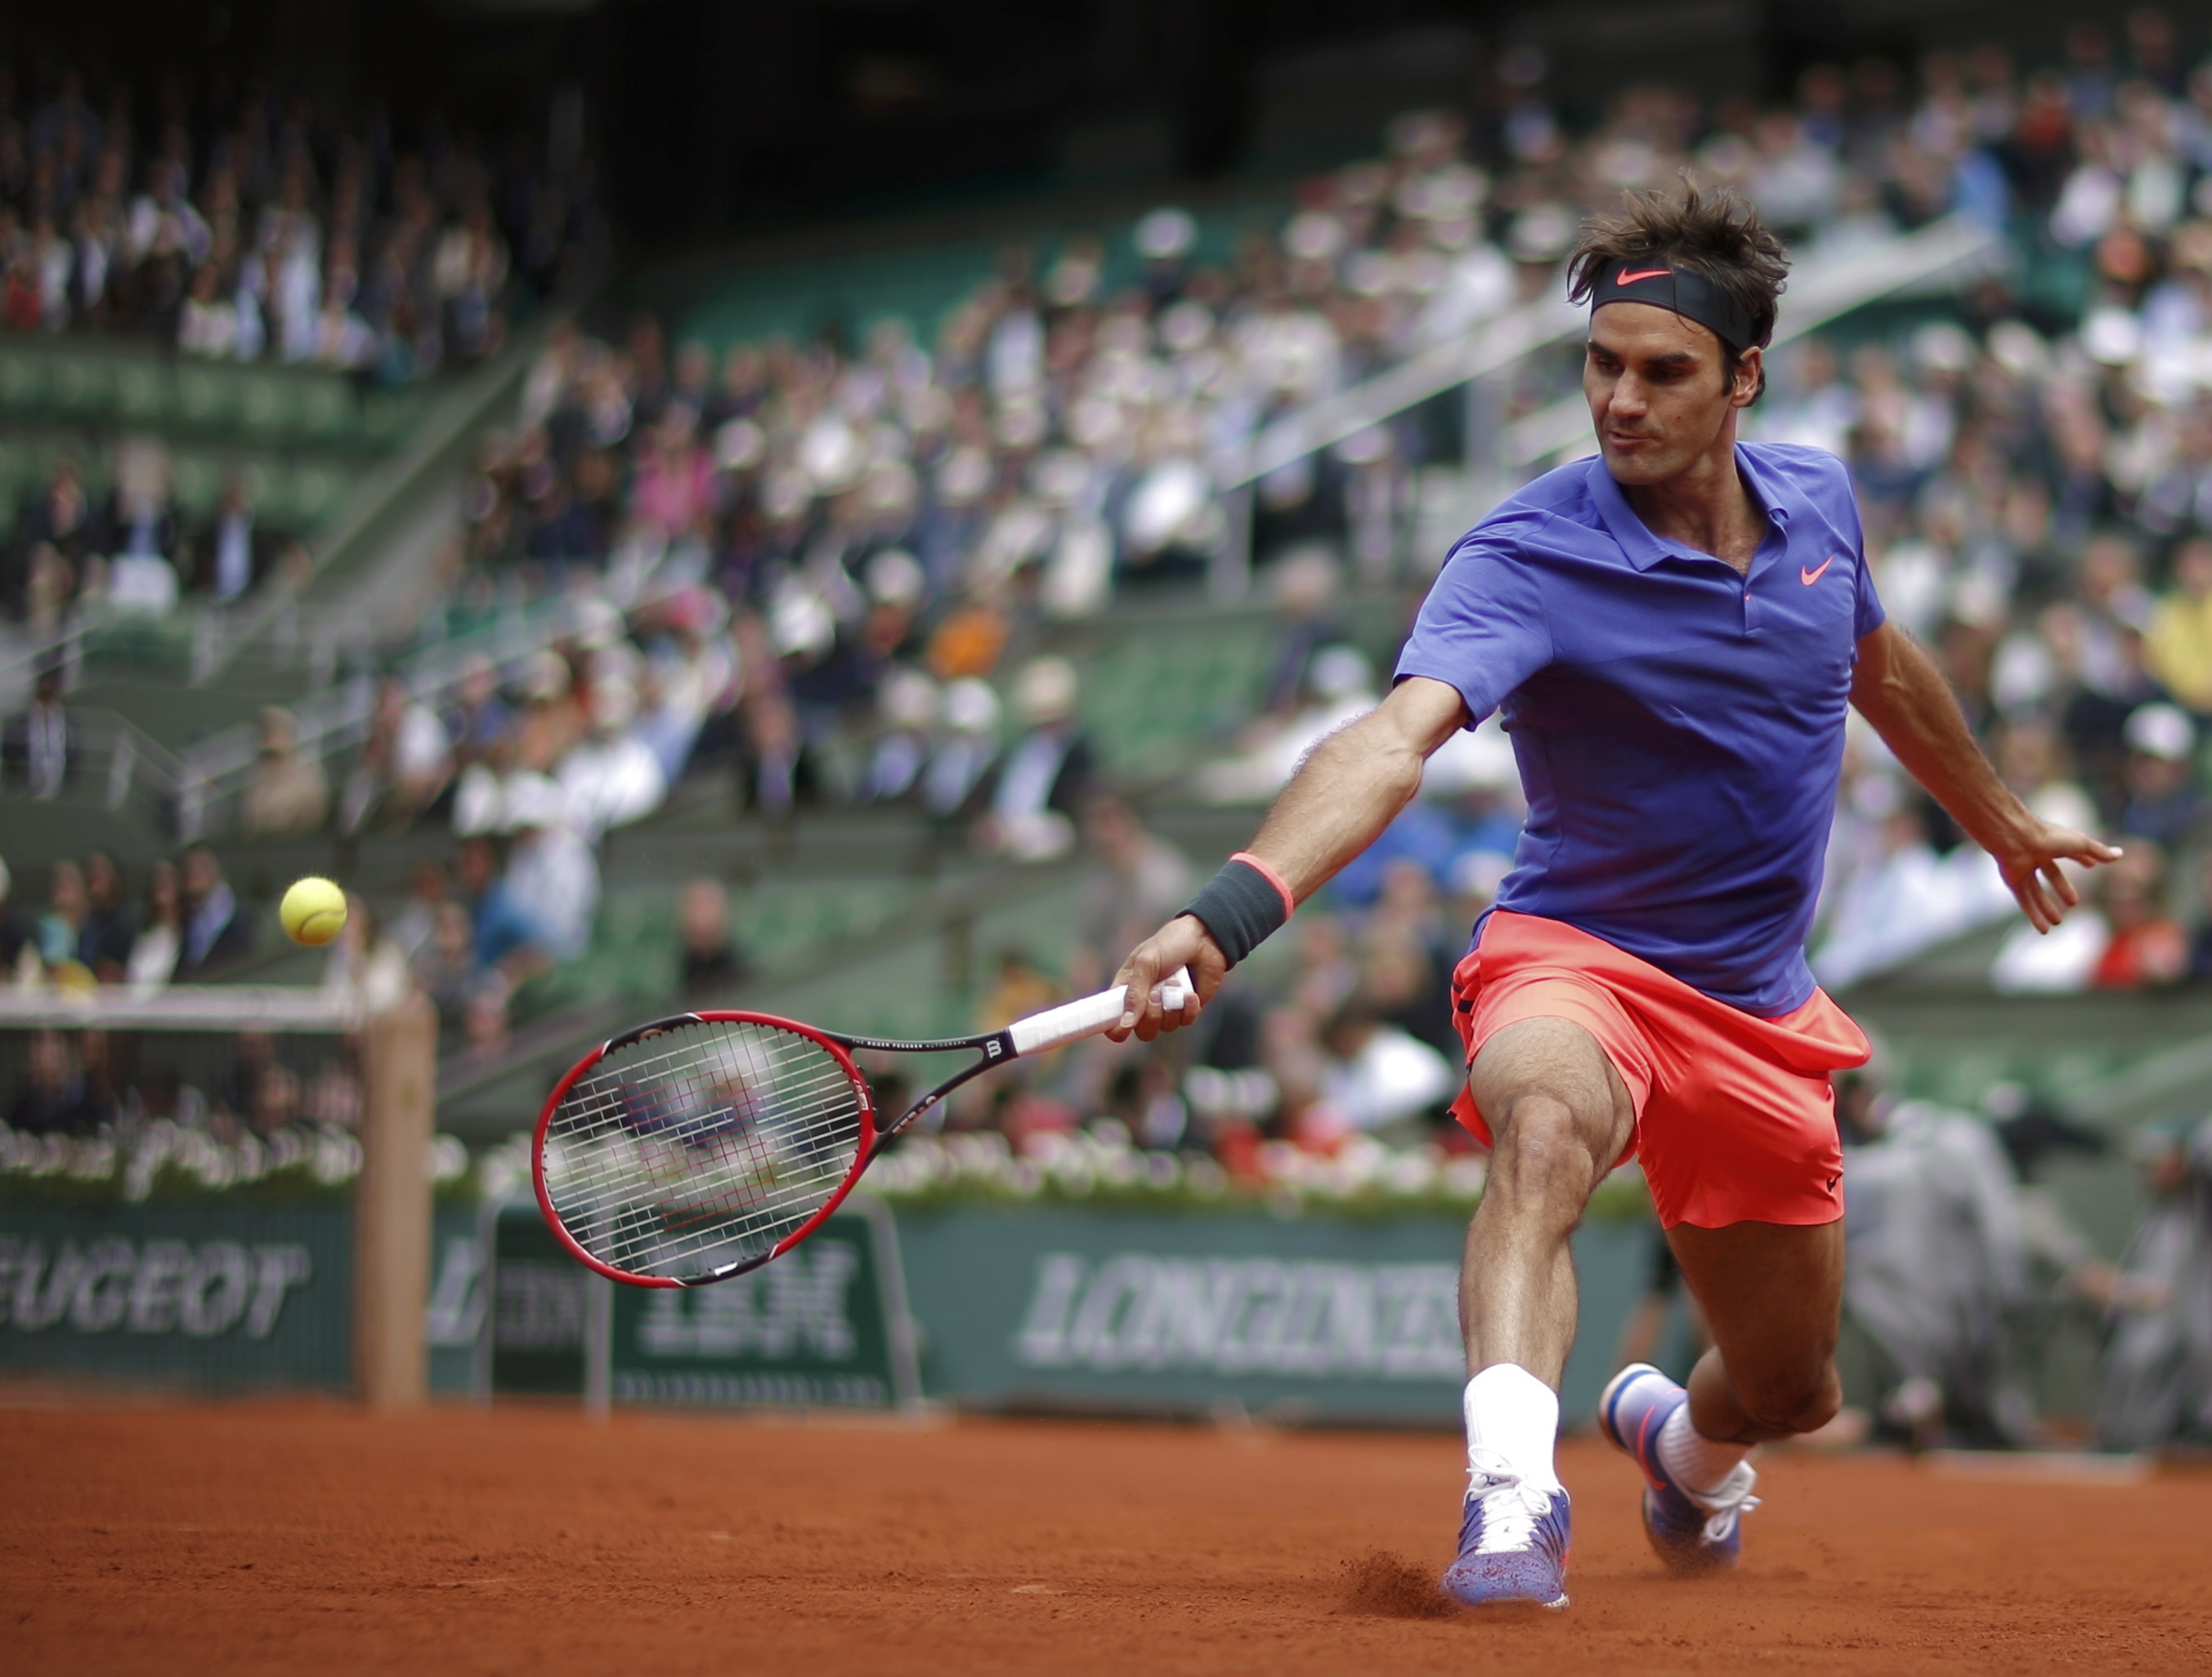 Roger Federer of Switzerland returns the ball to Gael Monfils of France during their men's singles match during the French Open tennis tournament at the Roland Garros stadium in Paris, France, June 1, 2015. REUTERS/Gonzalo Fuentes TPX IMAGES OF THE DAY